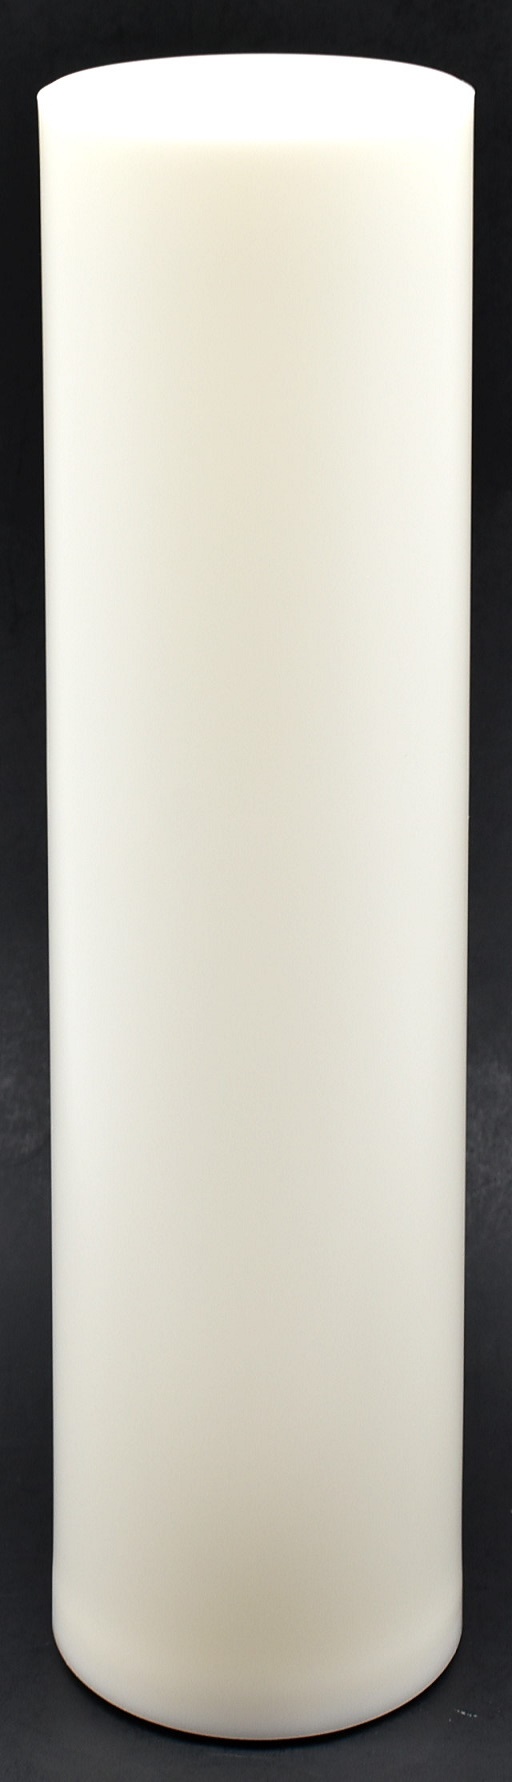 CANDLE, FLAMELESS, 3.25X12, WHITE OUTDOOR, PLASTIC, BROWN BOX